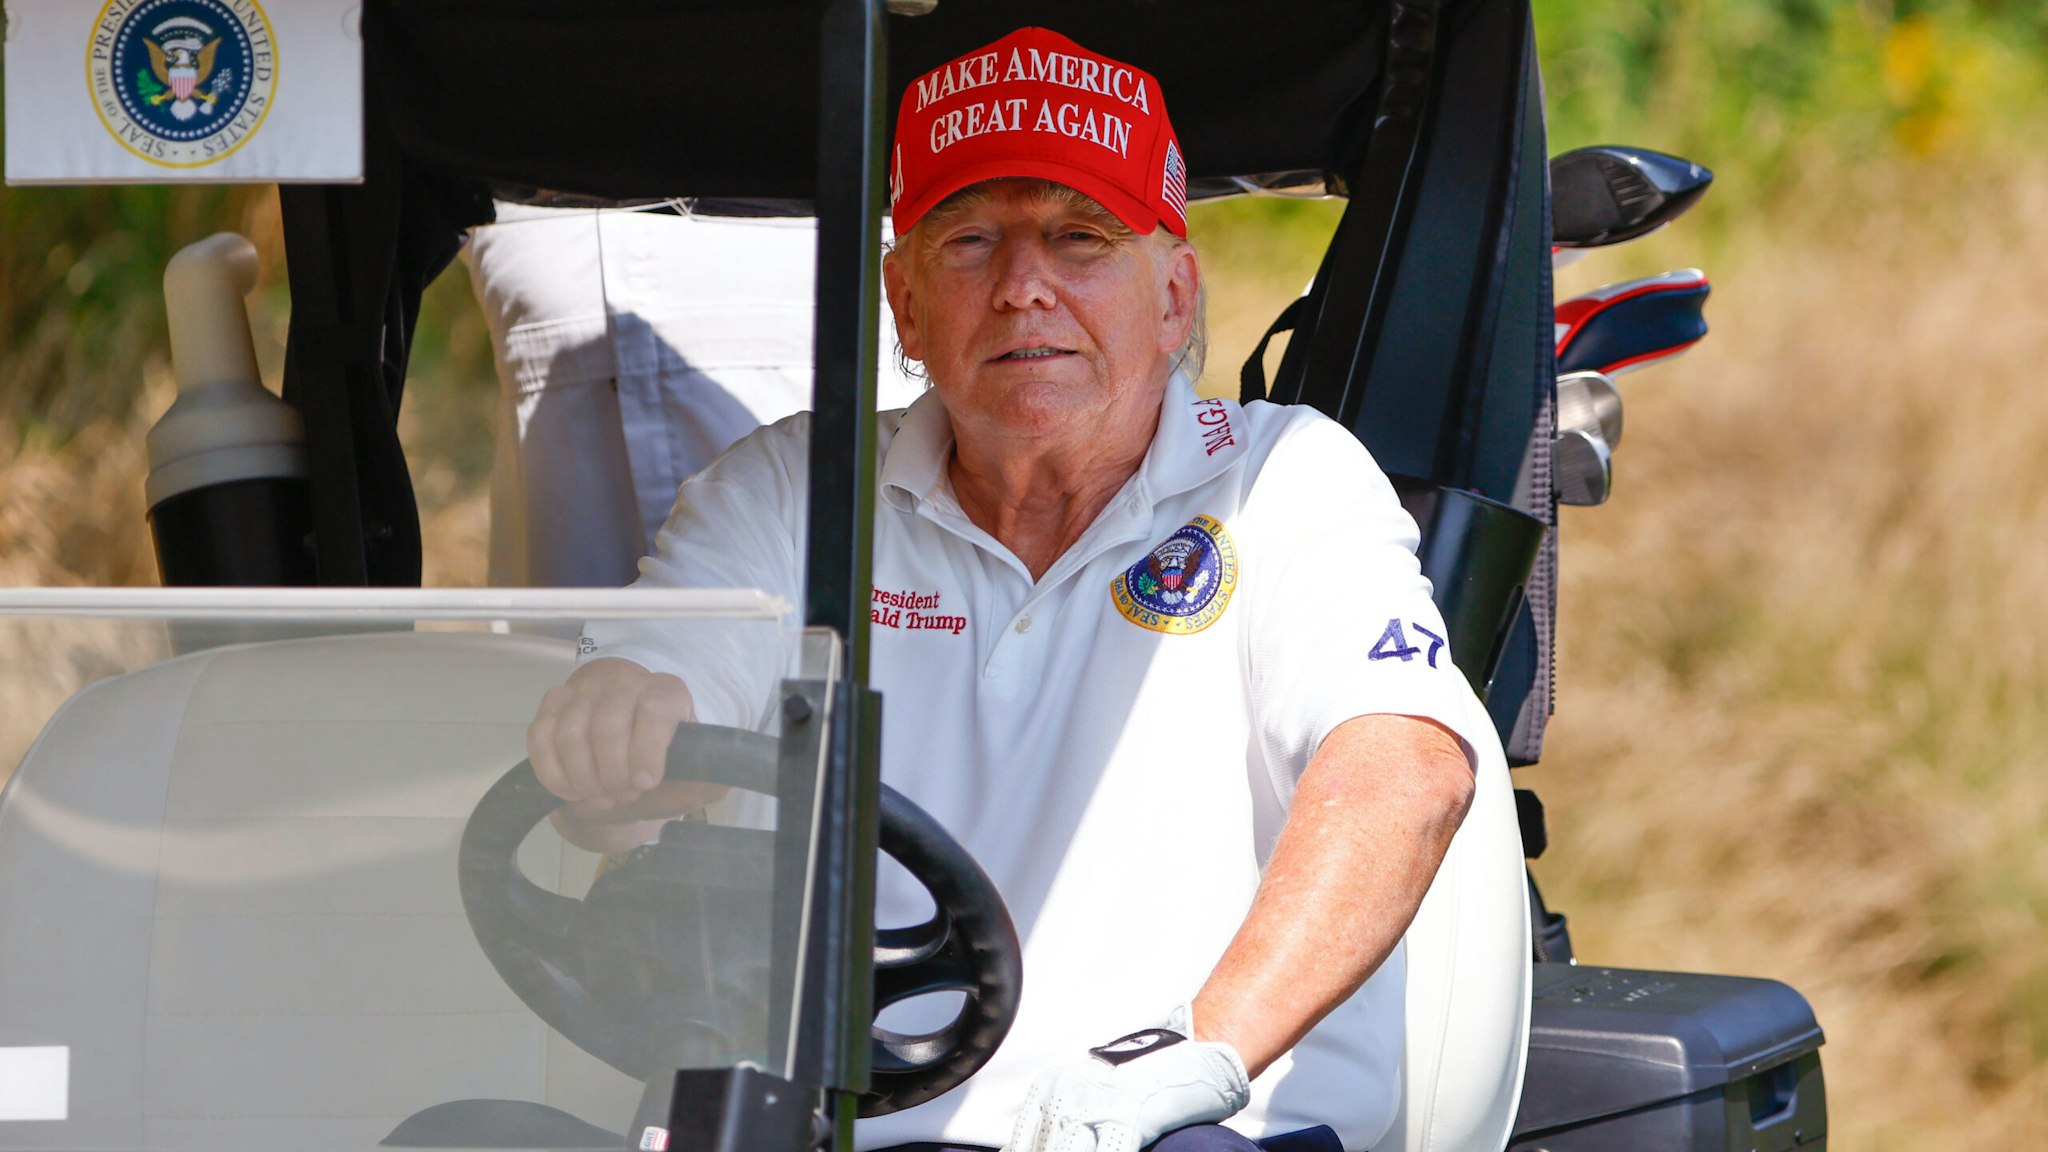 BEDMINSTER, NJ - AUGUST 09: Former President Donald Trump in his cart going to the 14th green during a practice round at Trump National Golf Club on August 9, 2023 in Bedminster, New Jersey